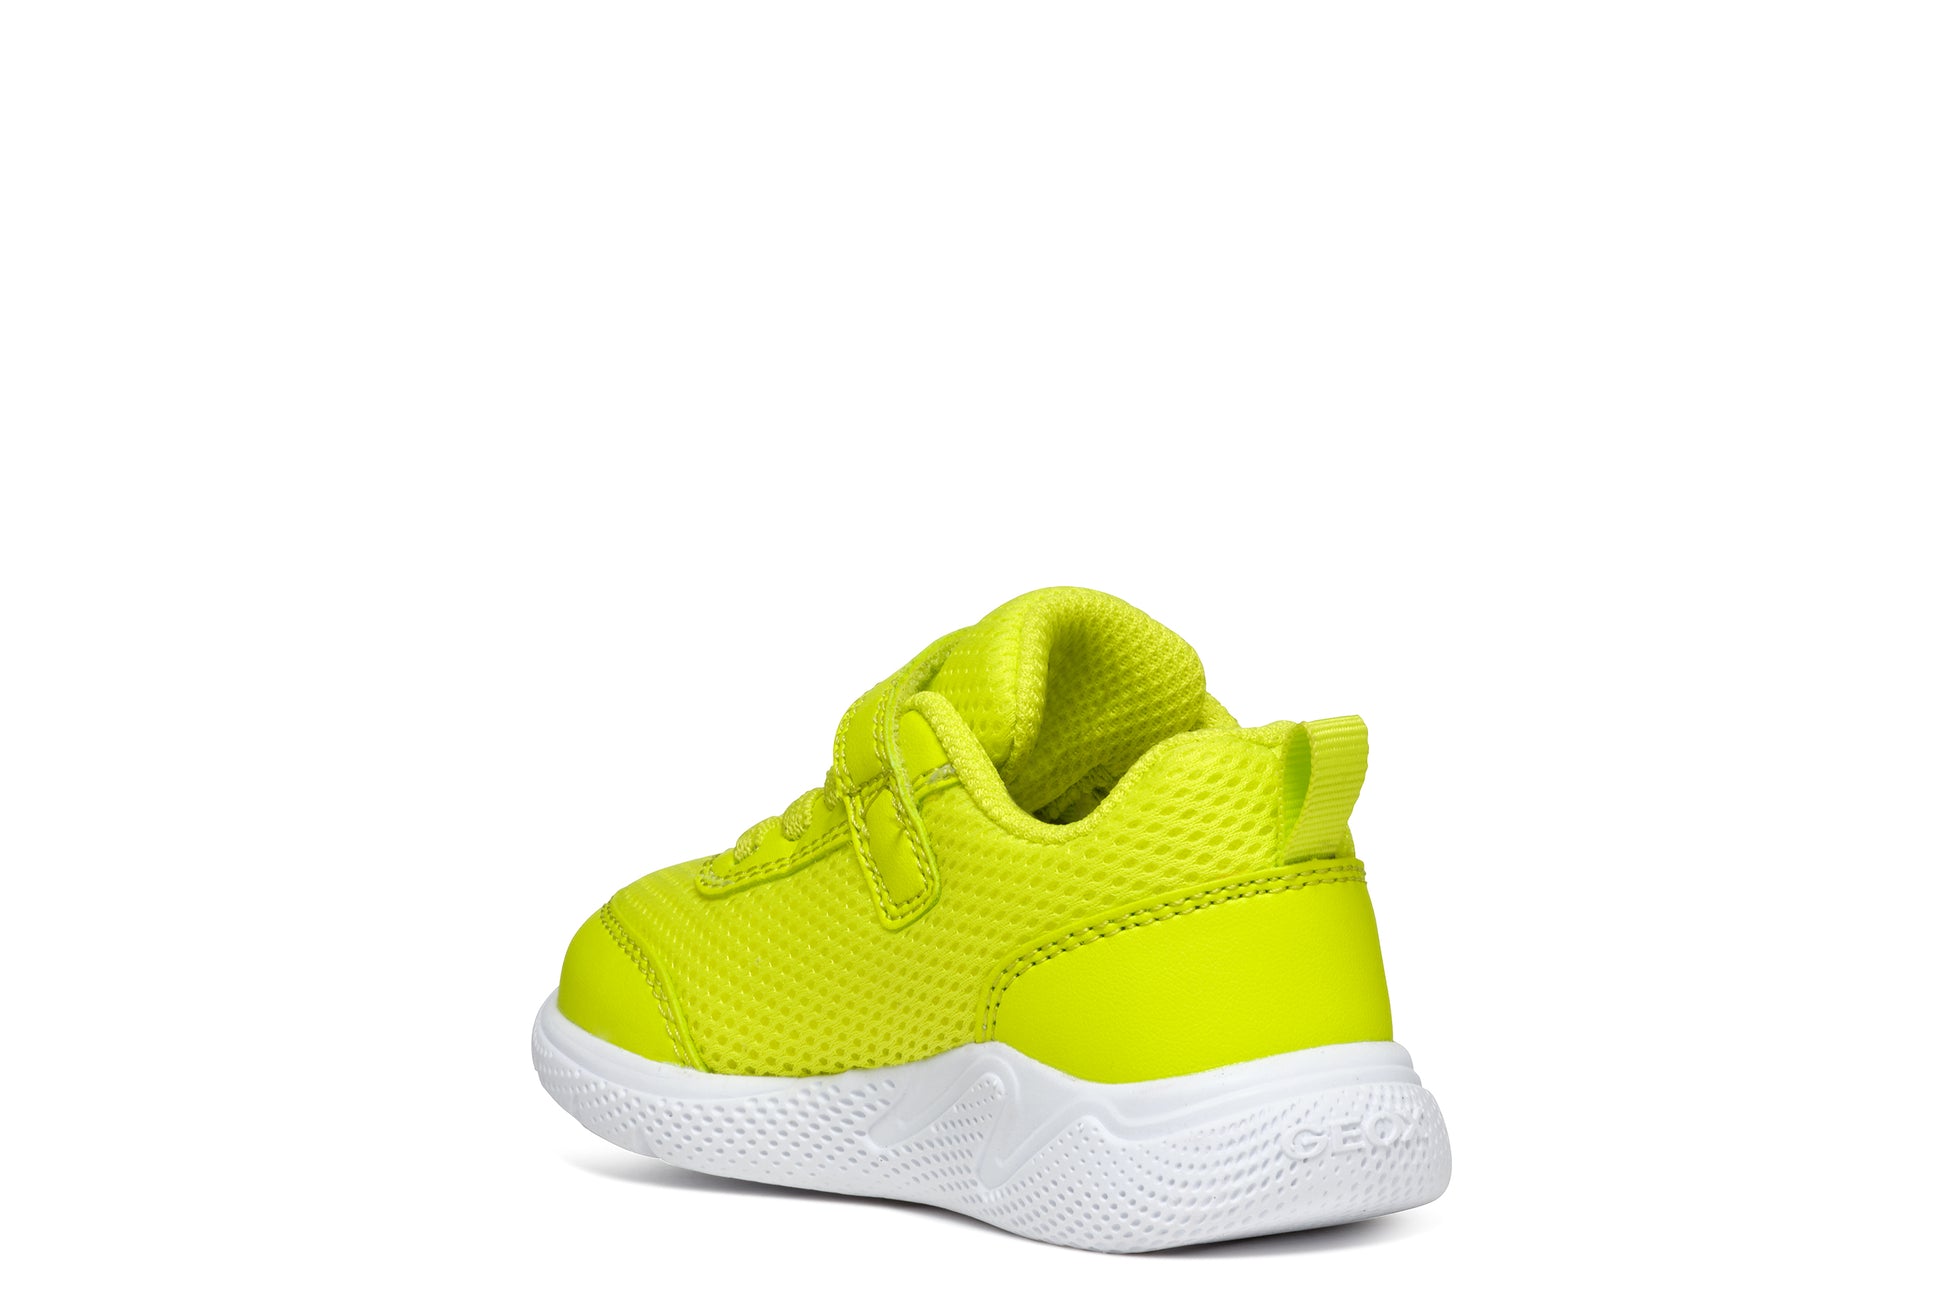 A unisex trainer by Geox, style B Sprintye, in fluorescent green with bungee lace and velcro fastening. Angled view of left side.